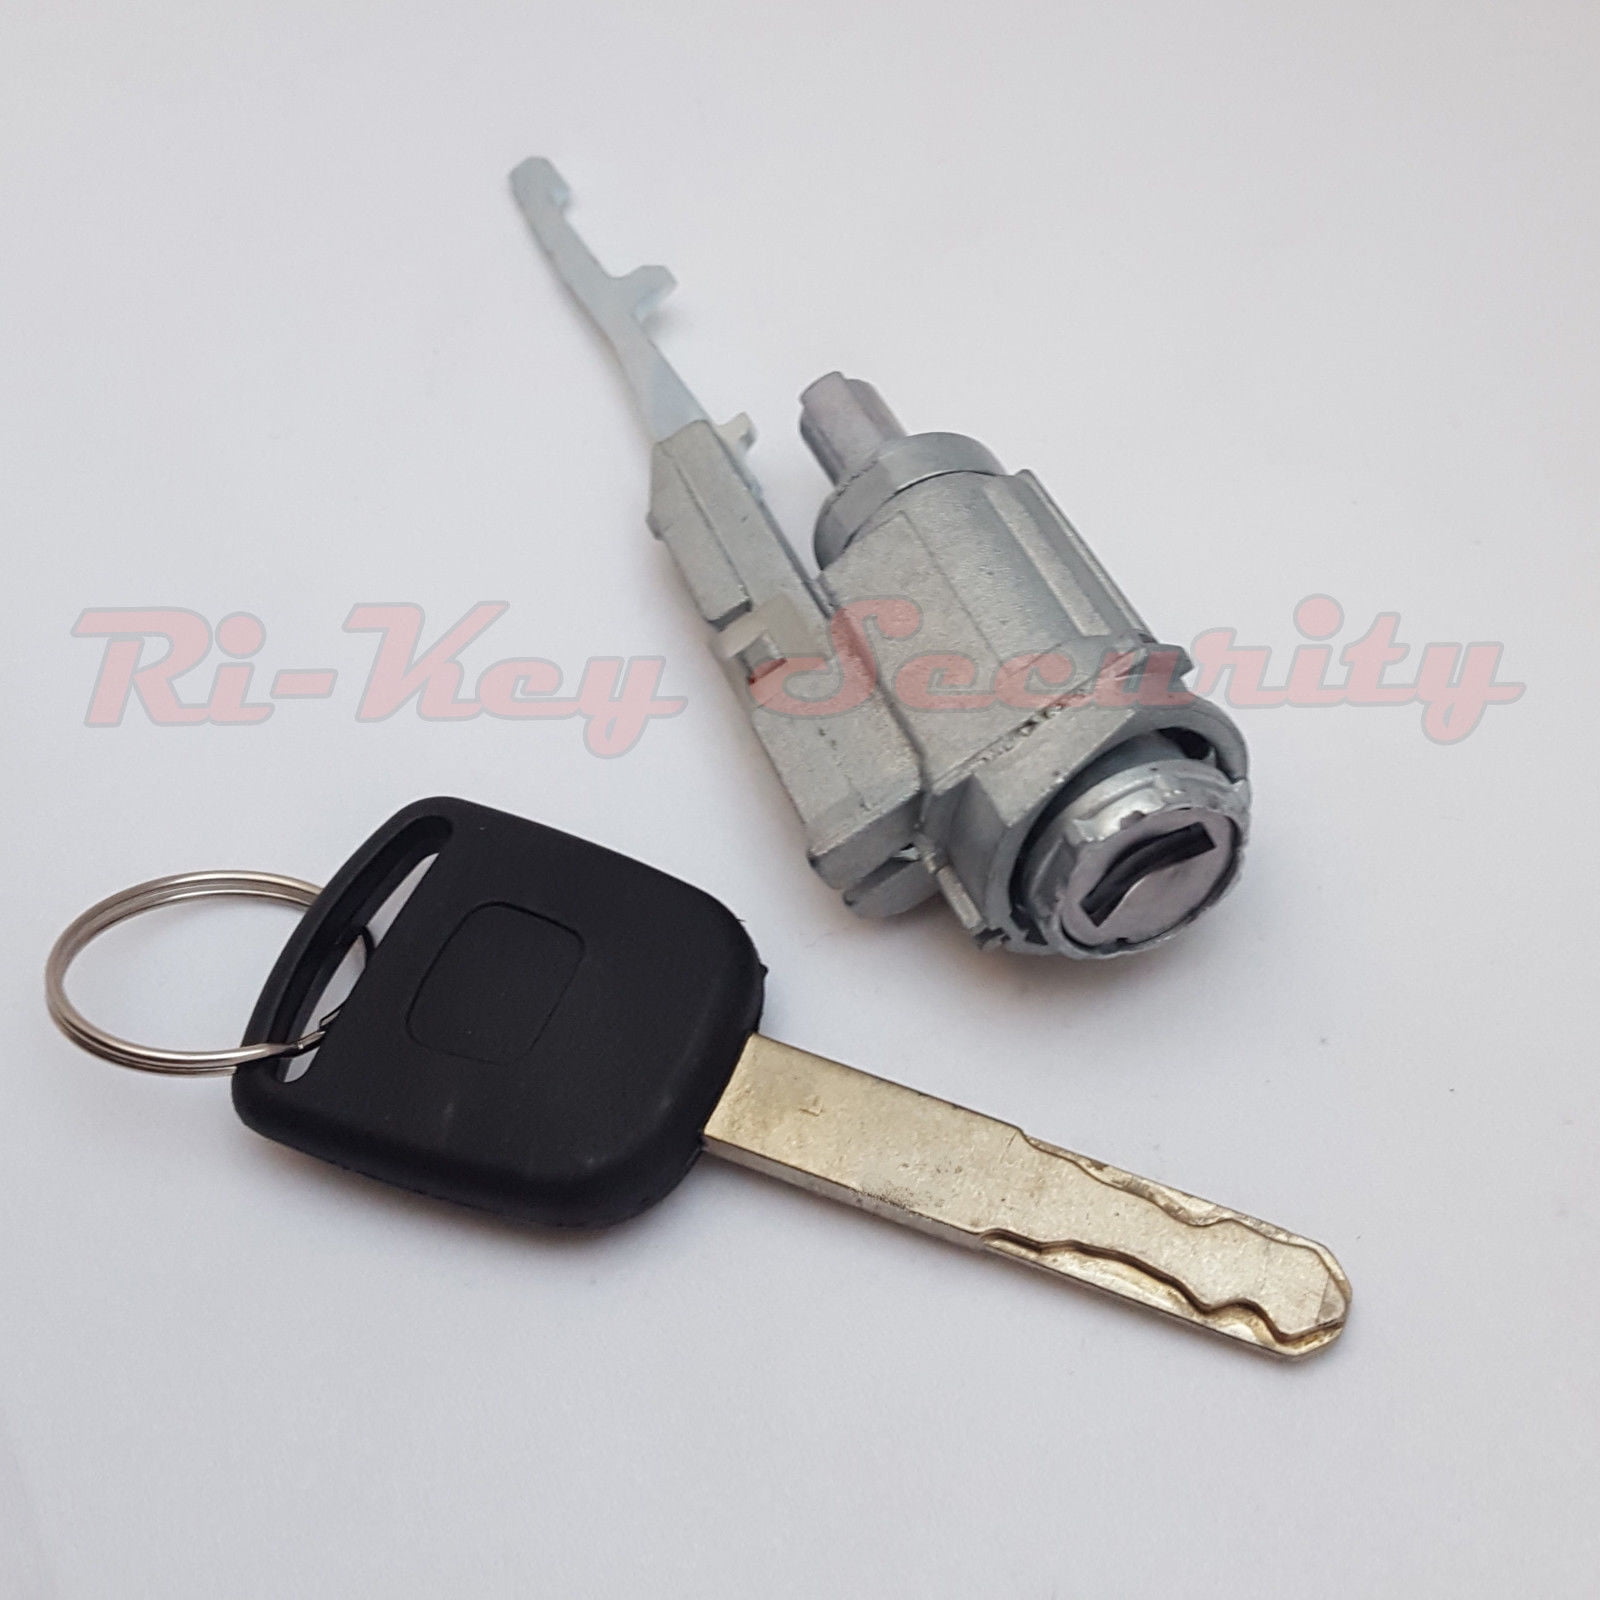 35100-SDA-A71 Ignition Switch Lock Cylinder Auto Trans Assembly with 2 Chip Keys for Honda Accord Odyssey CRV Fit 2003 2004 2005 2006 Replace 06350-SAA-G30 